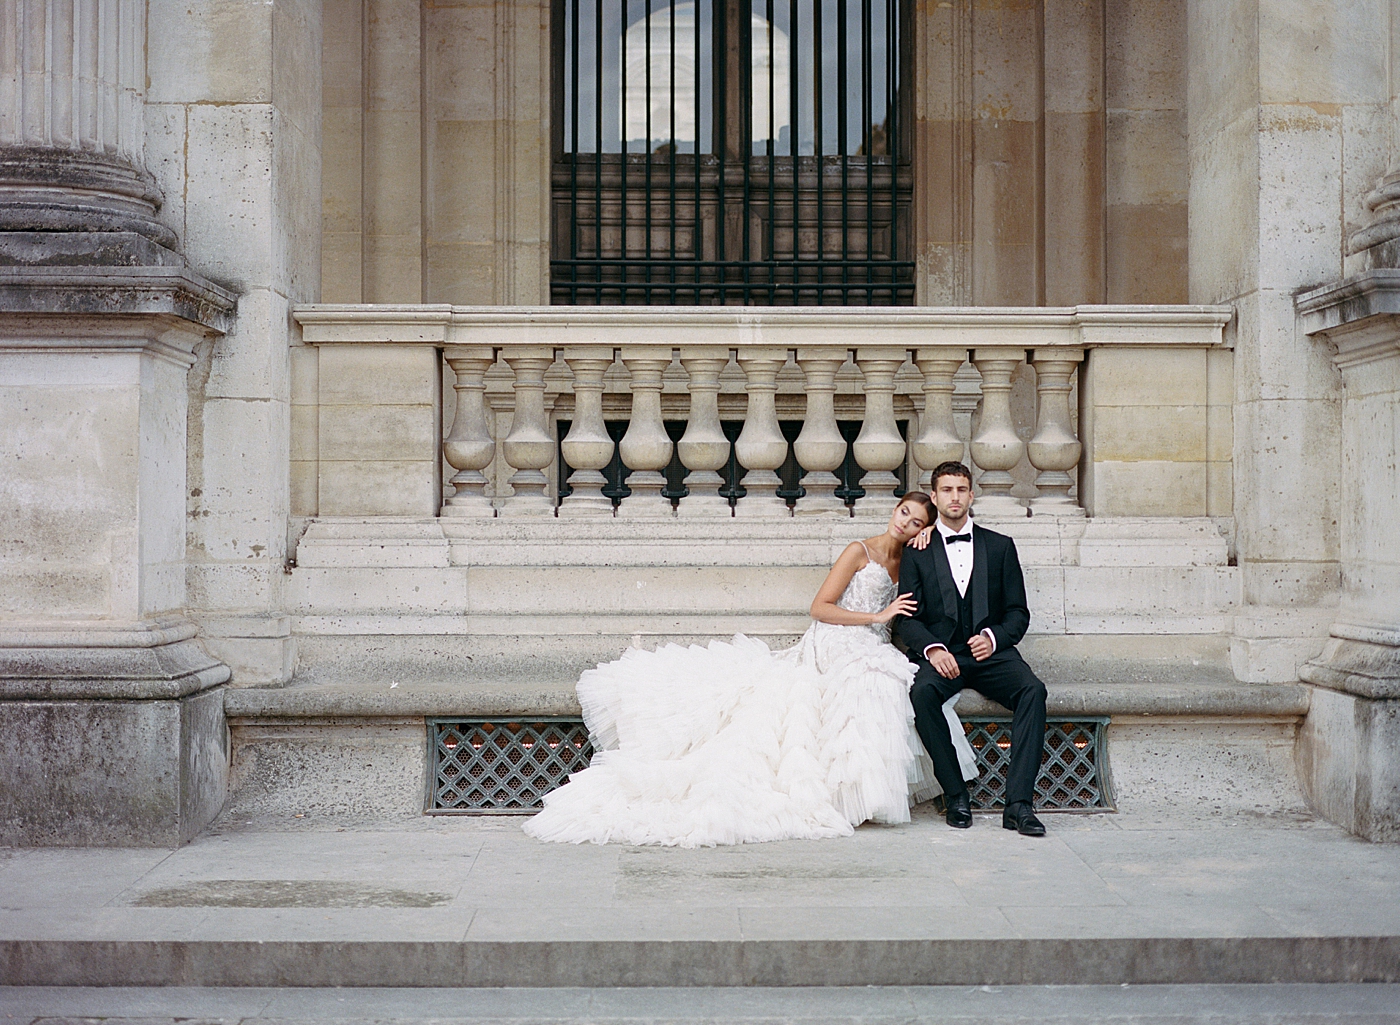 Bride and groom sitting together on a concrete bench | Image by Hope Helmuth Photography